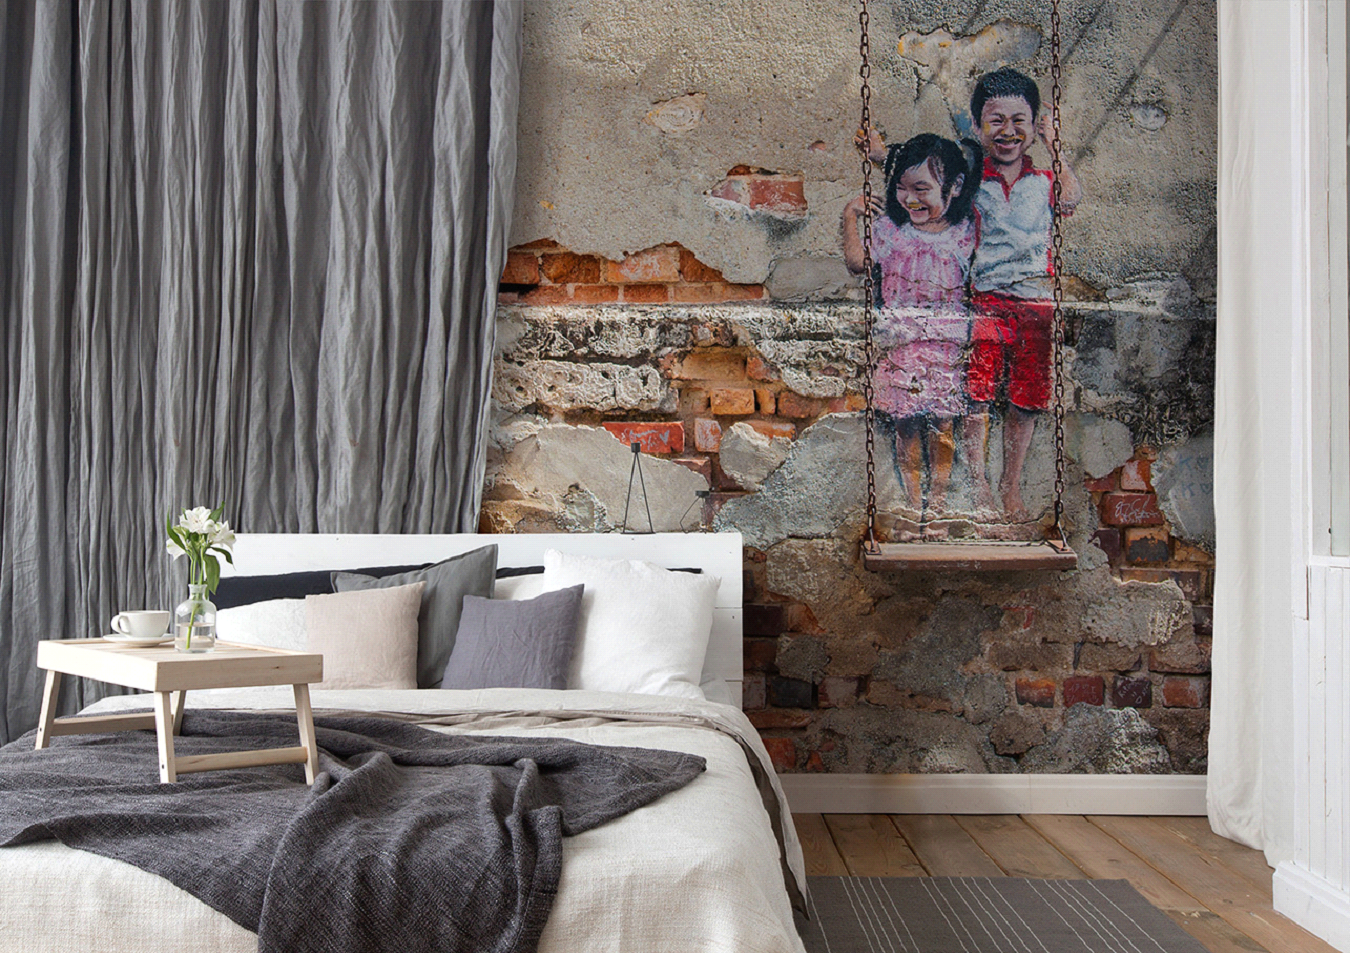 Home decor street style 4 Street art at home? You can count us in! - 11 look like a palace